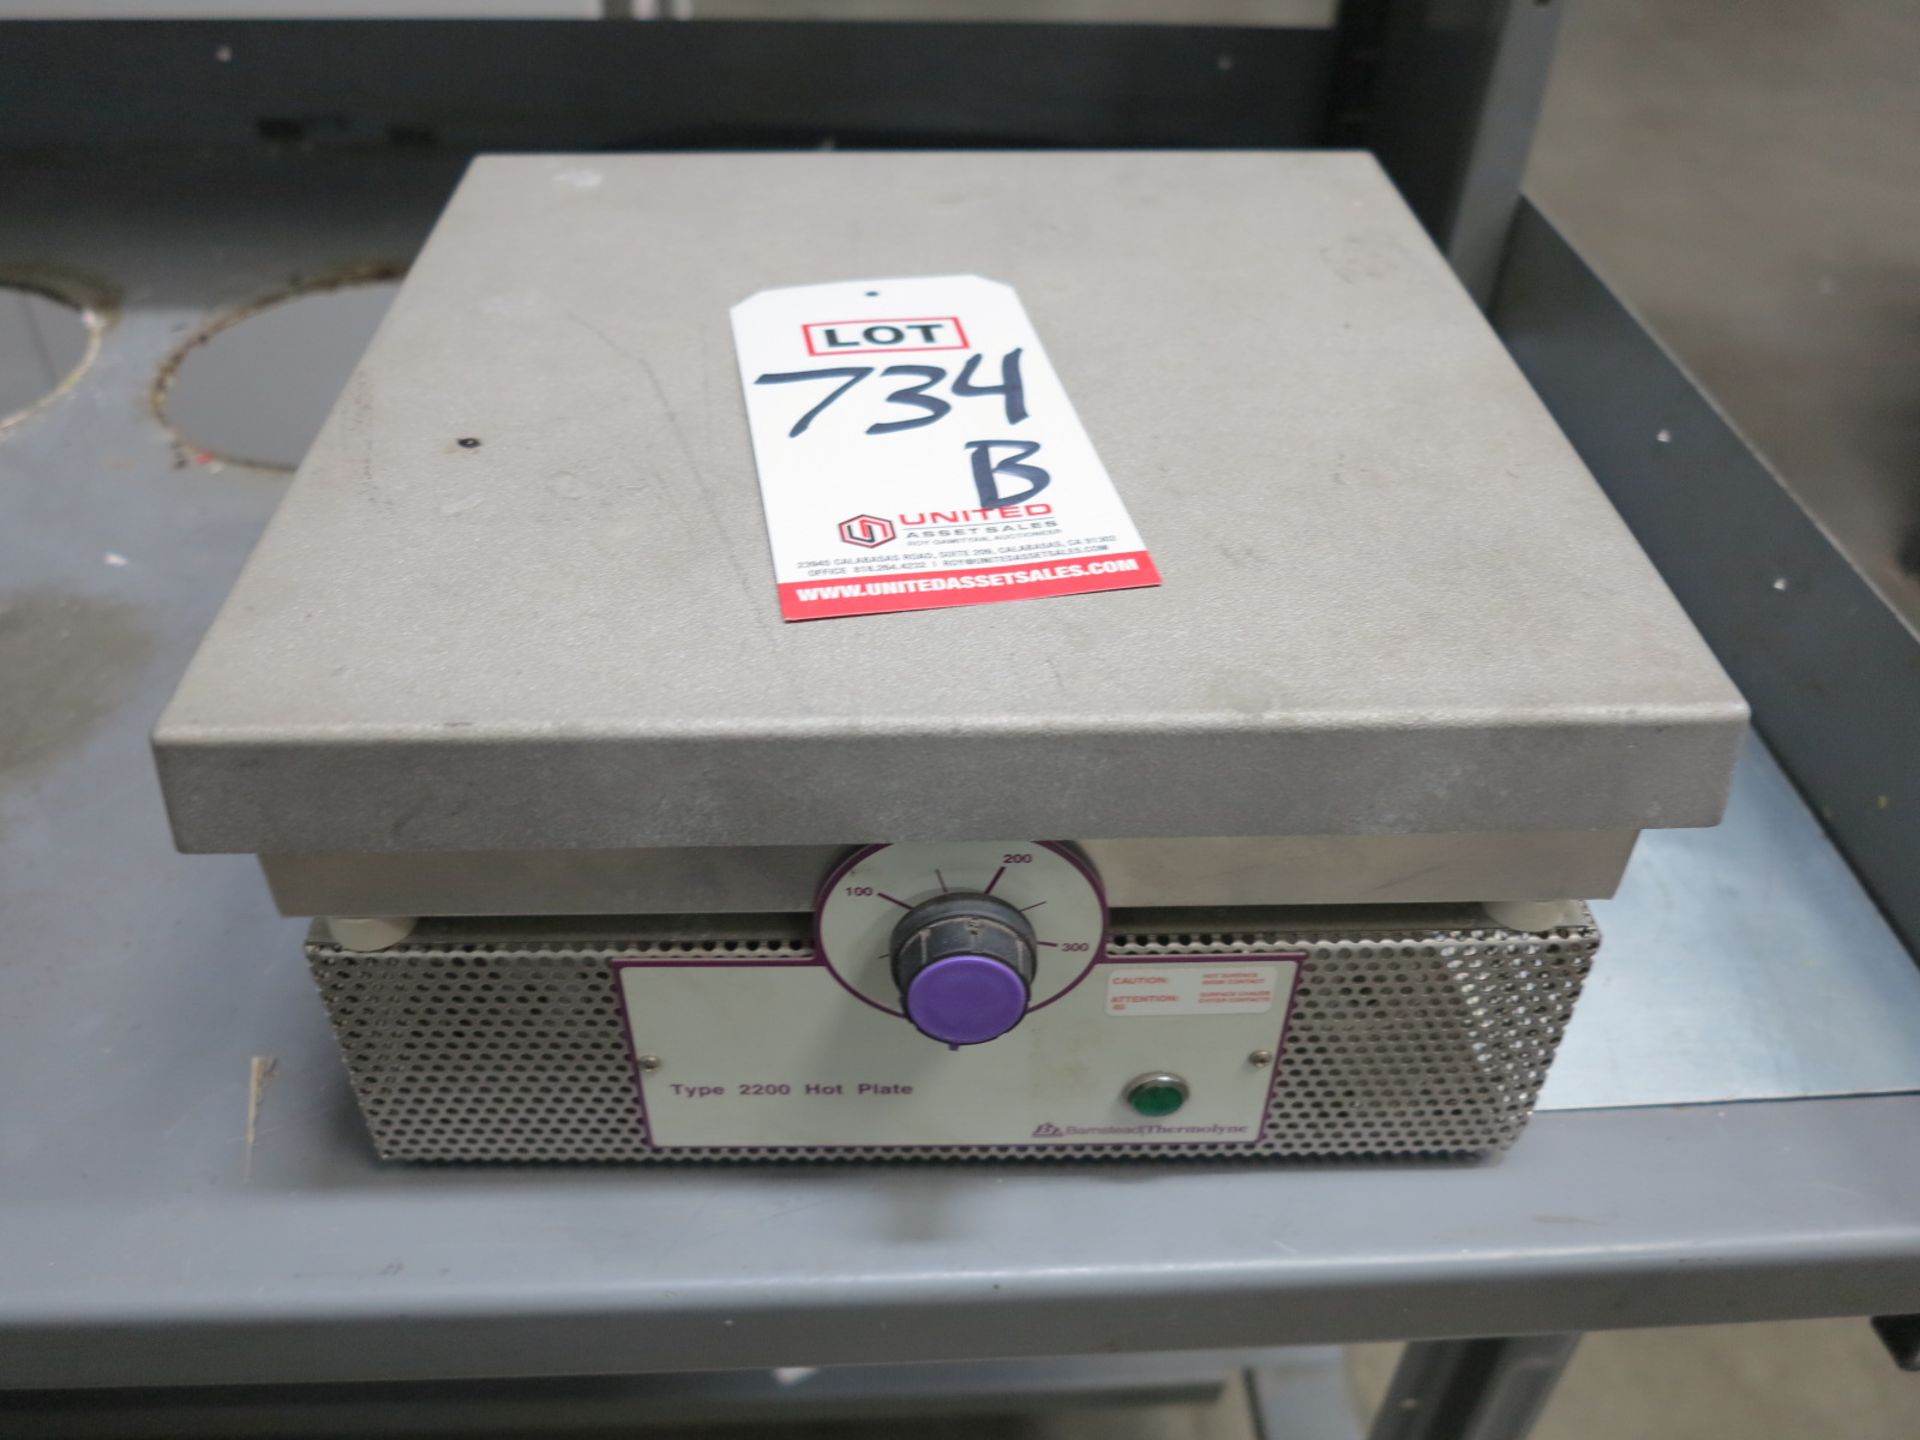 THERMO SCIENTIFIC HOT PLATE, TYPE 2200